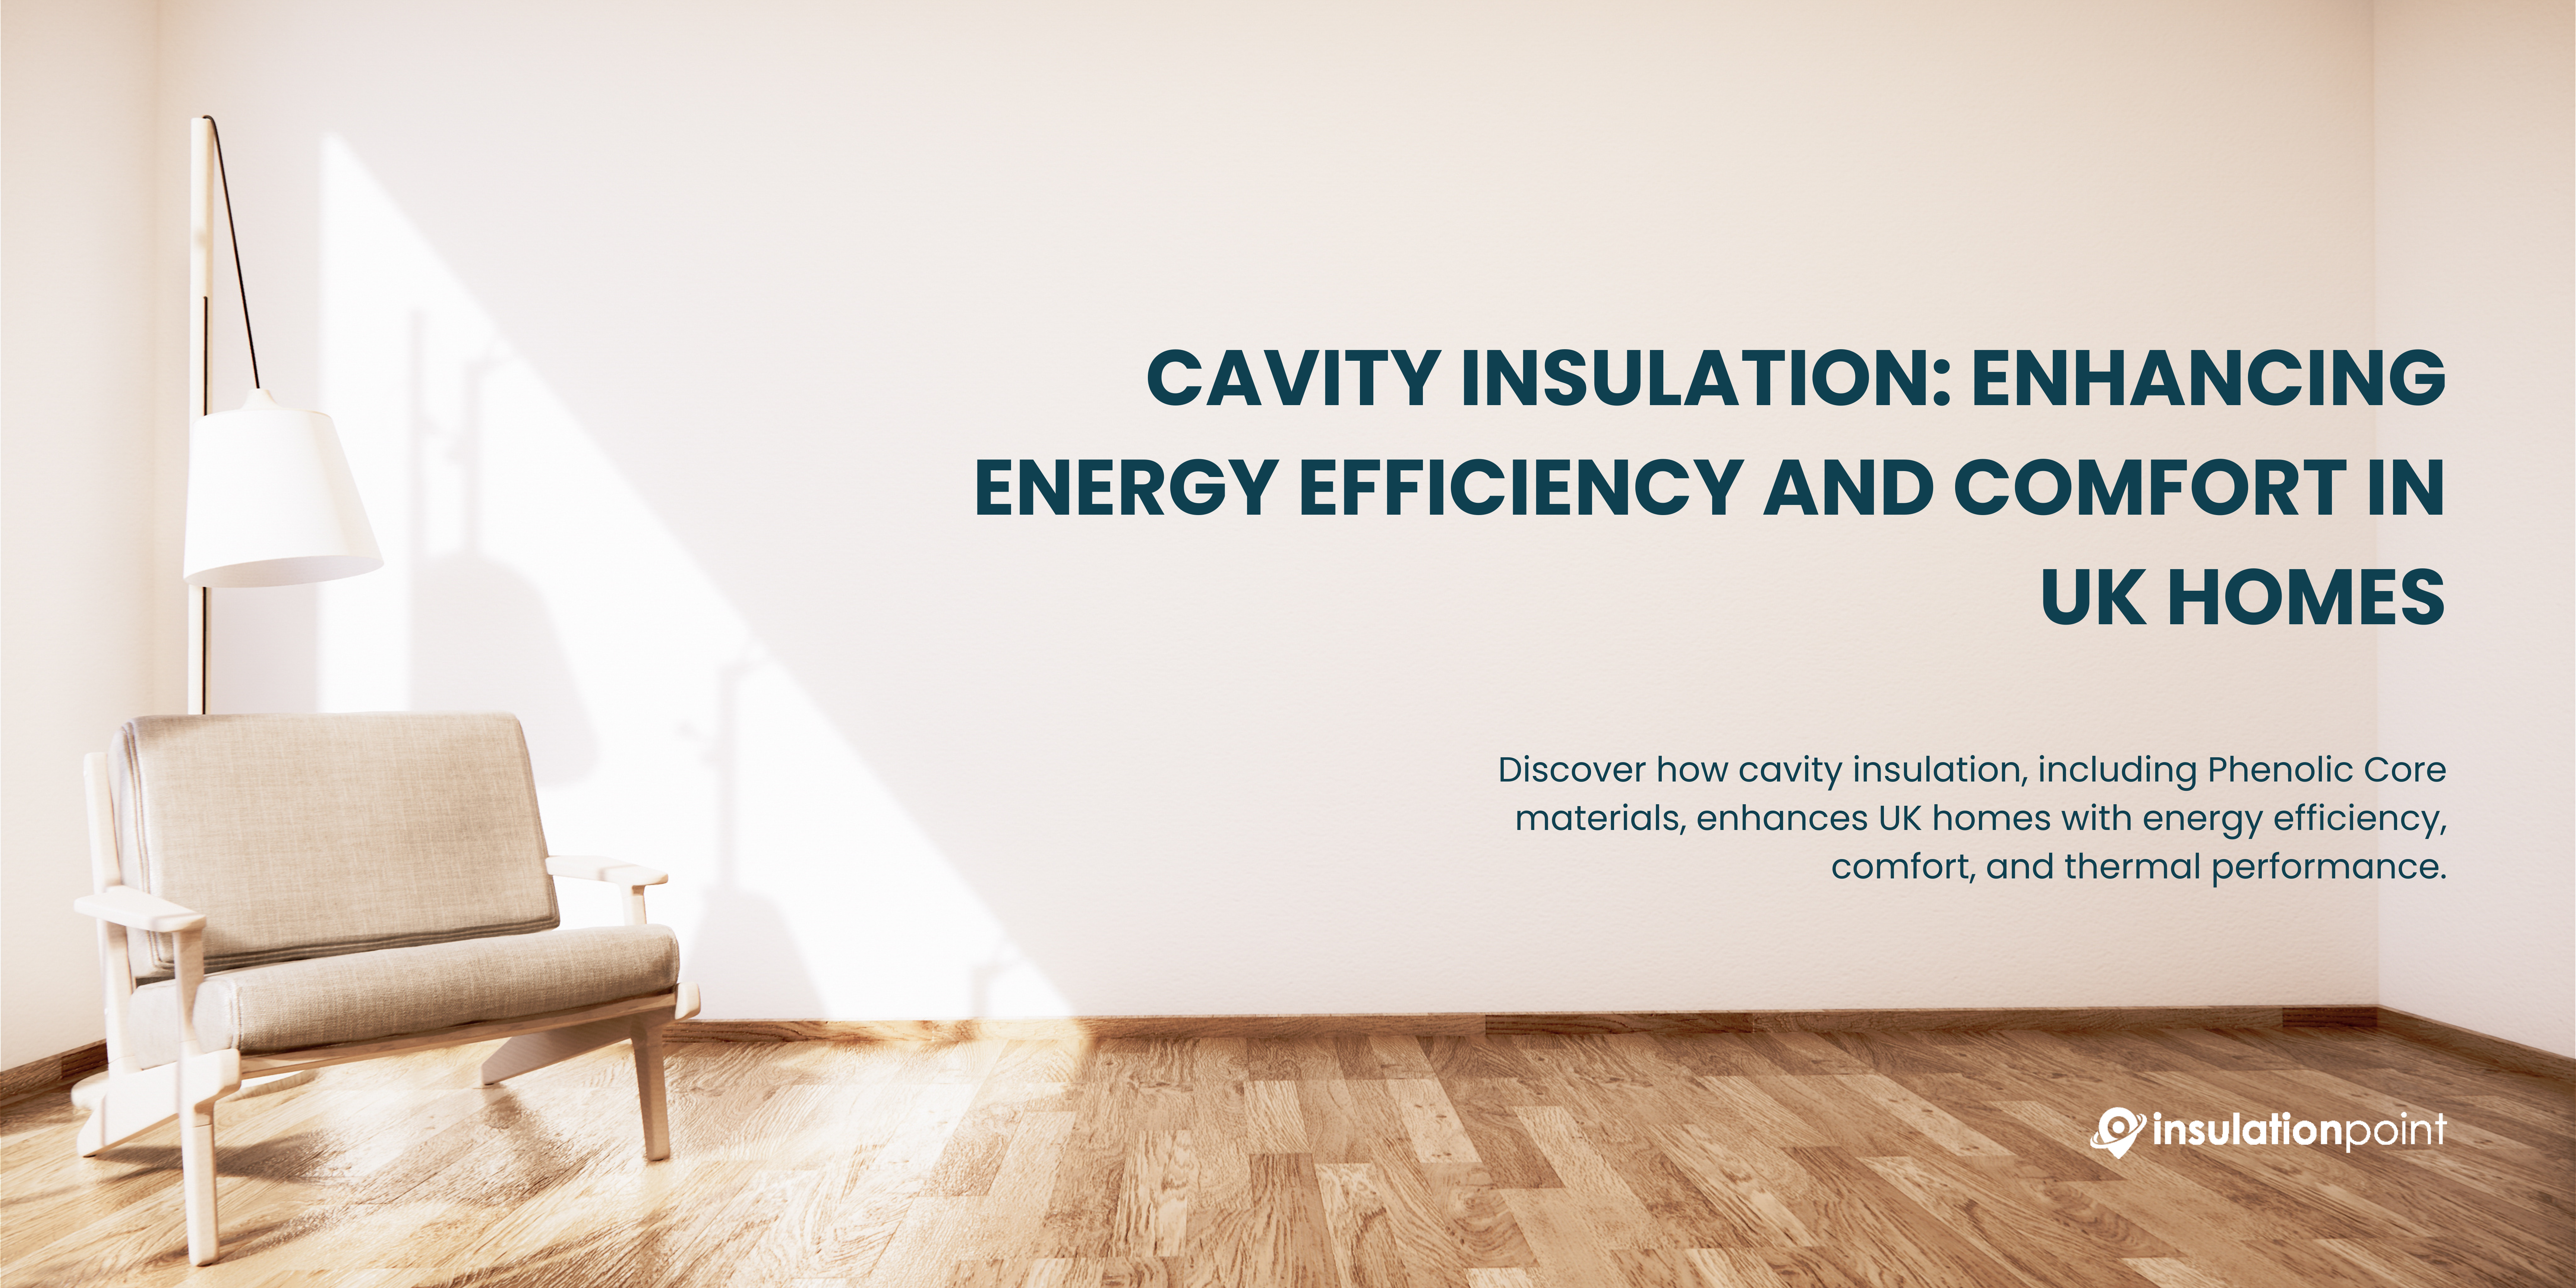 Cavity Insulation: Enhancing Energy Efficiency and Comfort in UK Homes